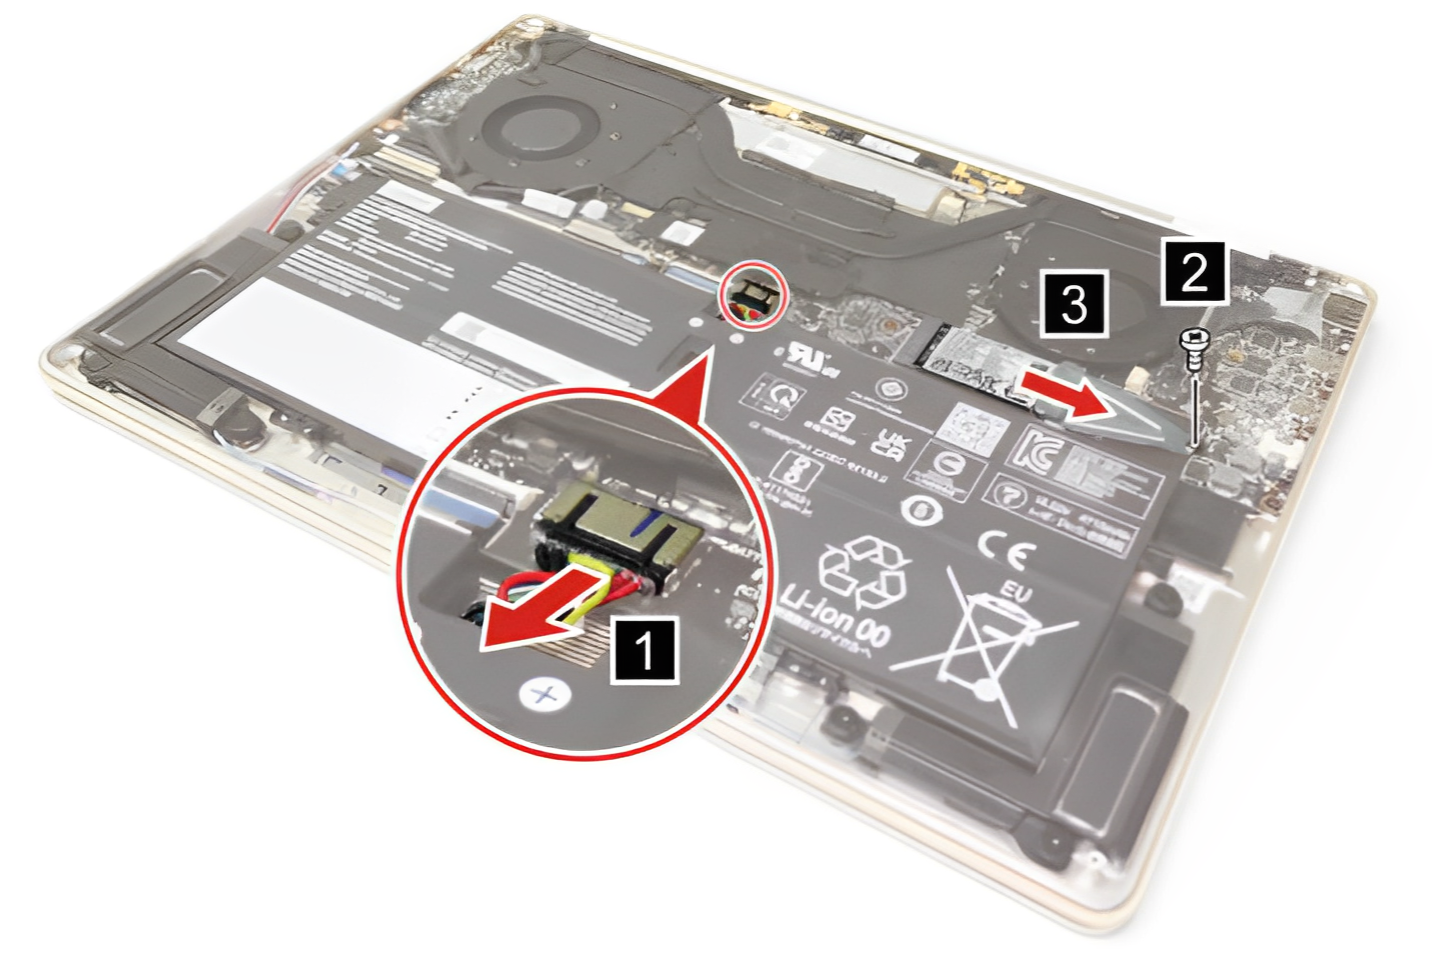 Illustration showing how to disconnect the battery cable and remove the M.2 2242 SSD with bracket from the Lenovo Yoga 9i